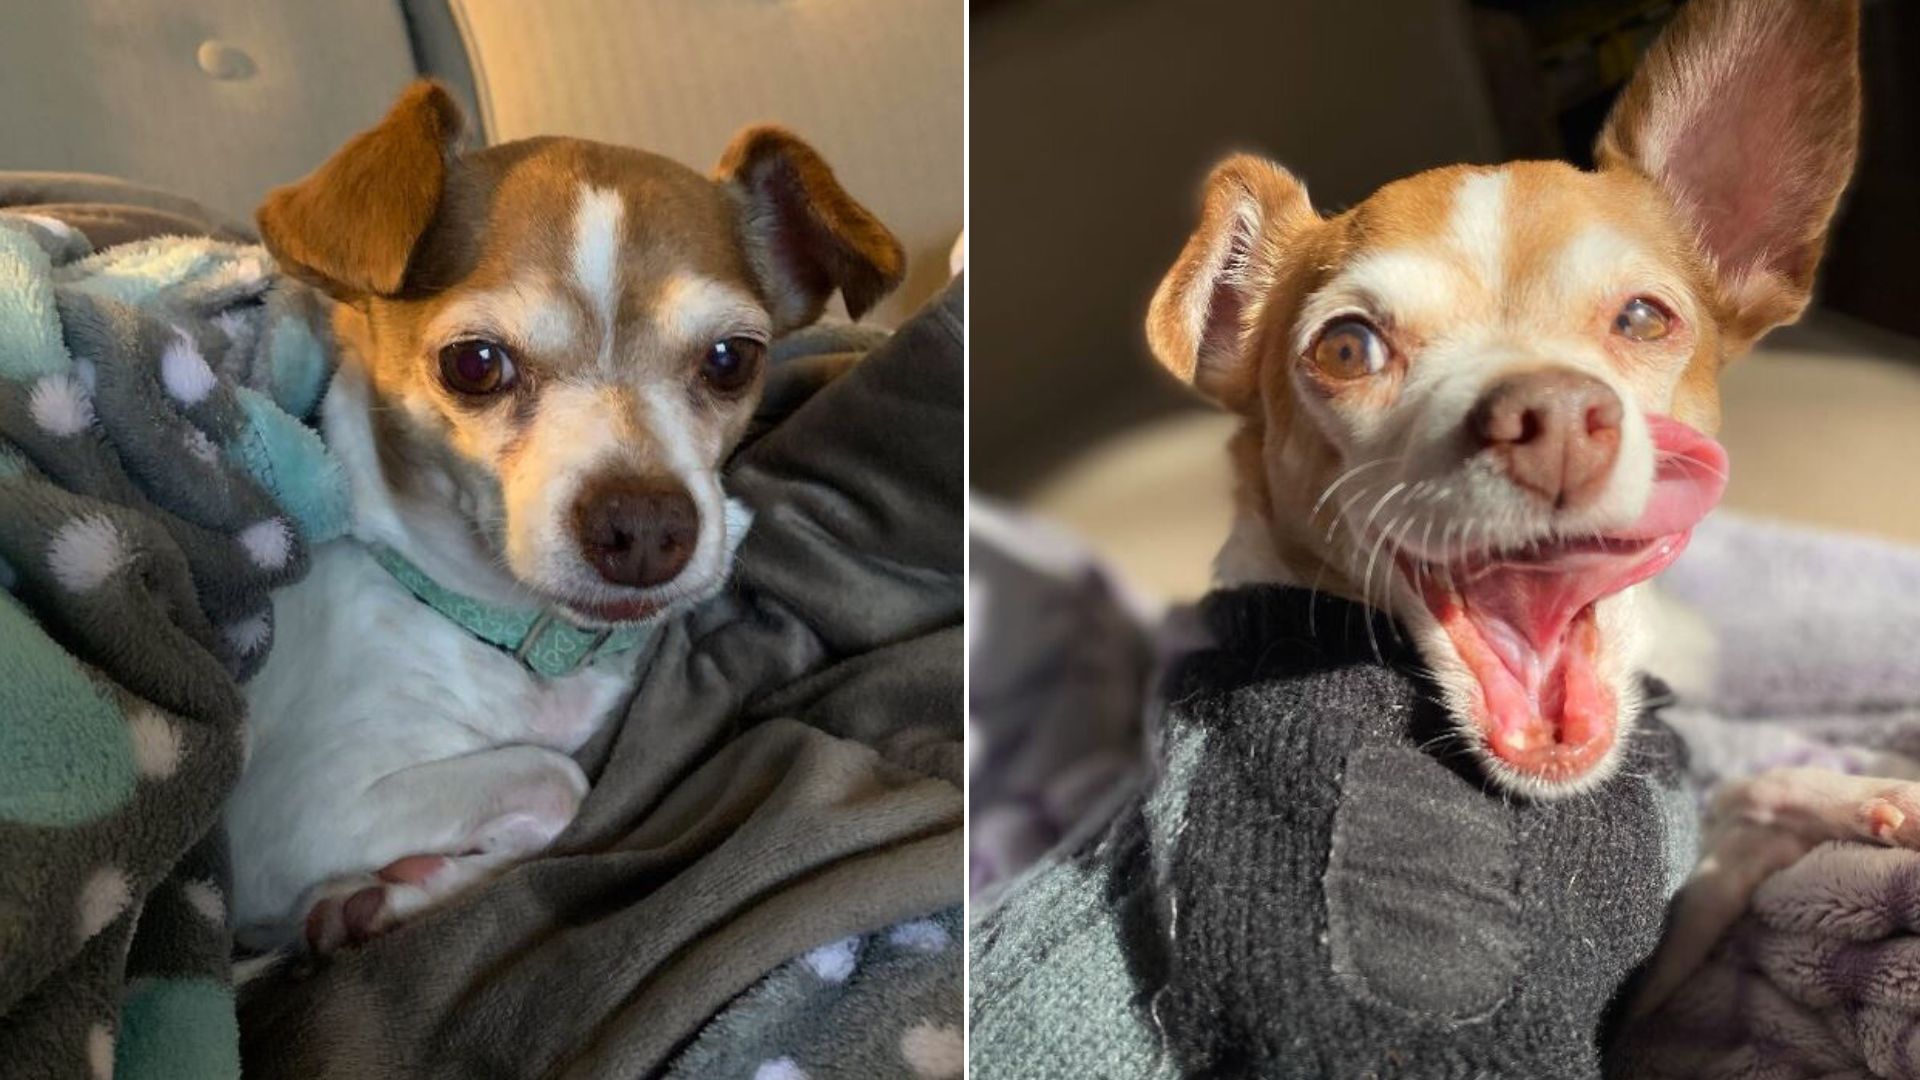 16-Year-Old Chihuahua Set For Euthanasia Gets One More Chance At Life